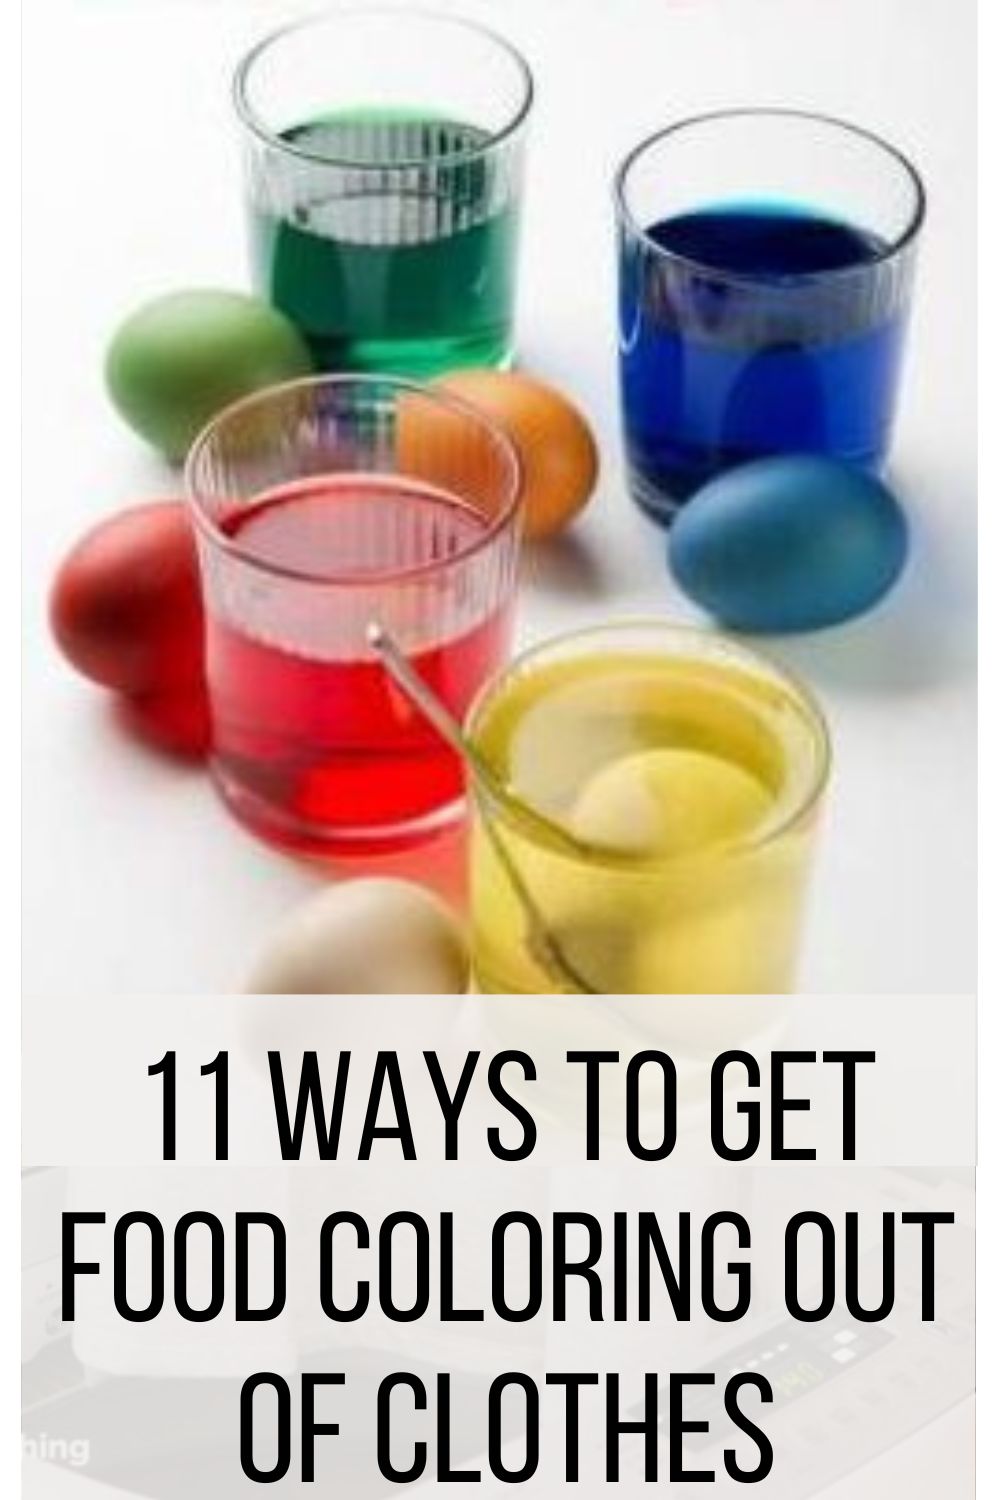 11 Ways to Get Food Coloring Out of Clothes